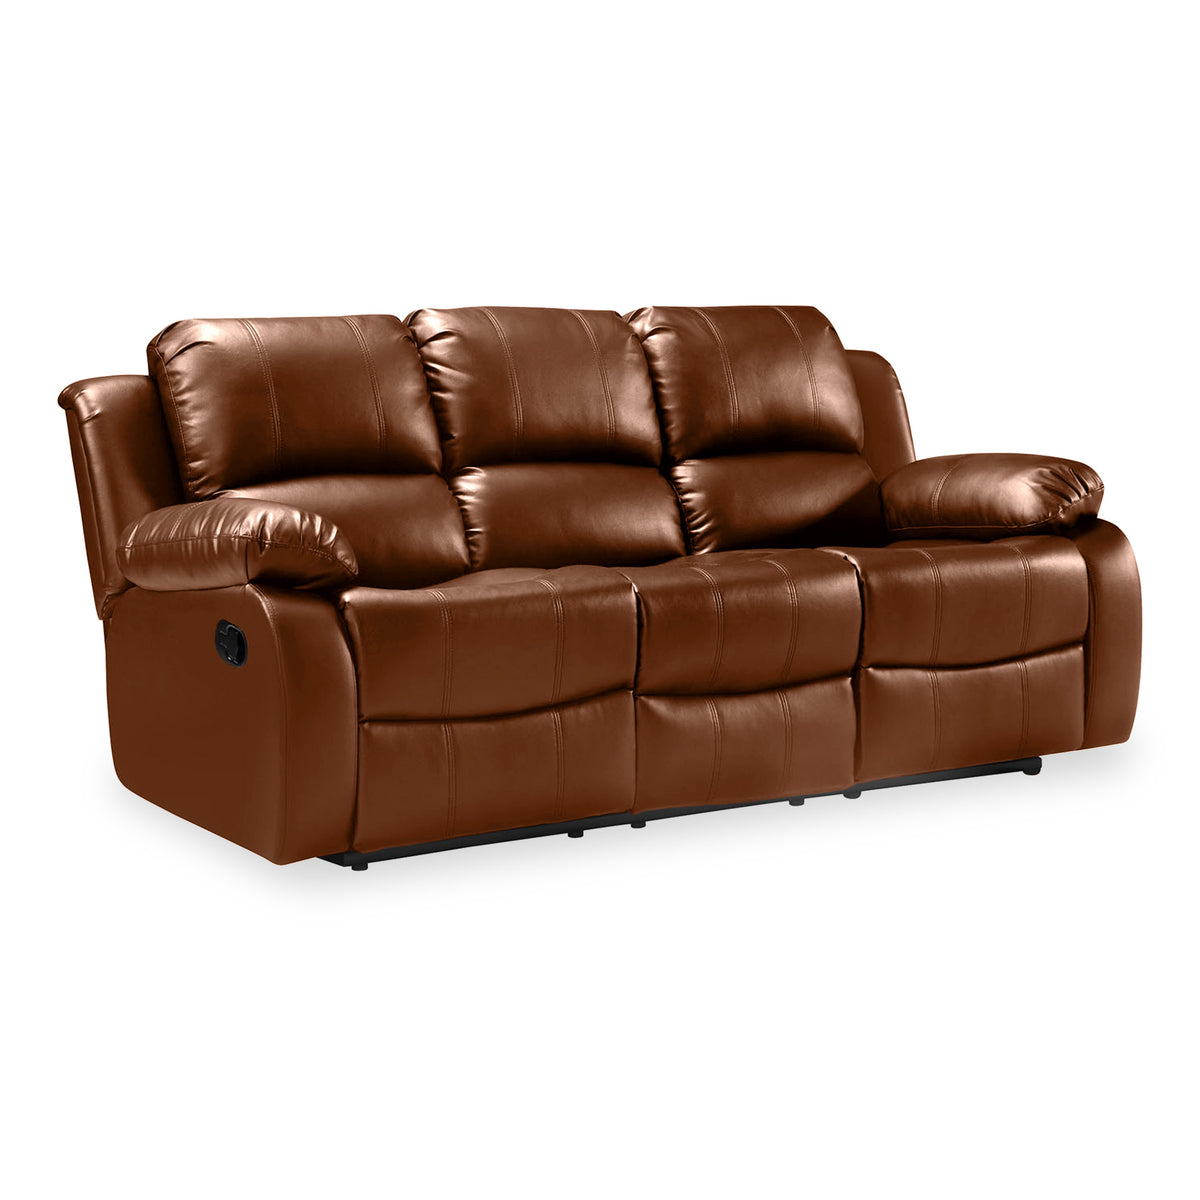 Valencia Tan 3 Seater Reclining Leather Sofa from Roseland Furniture